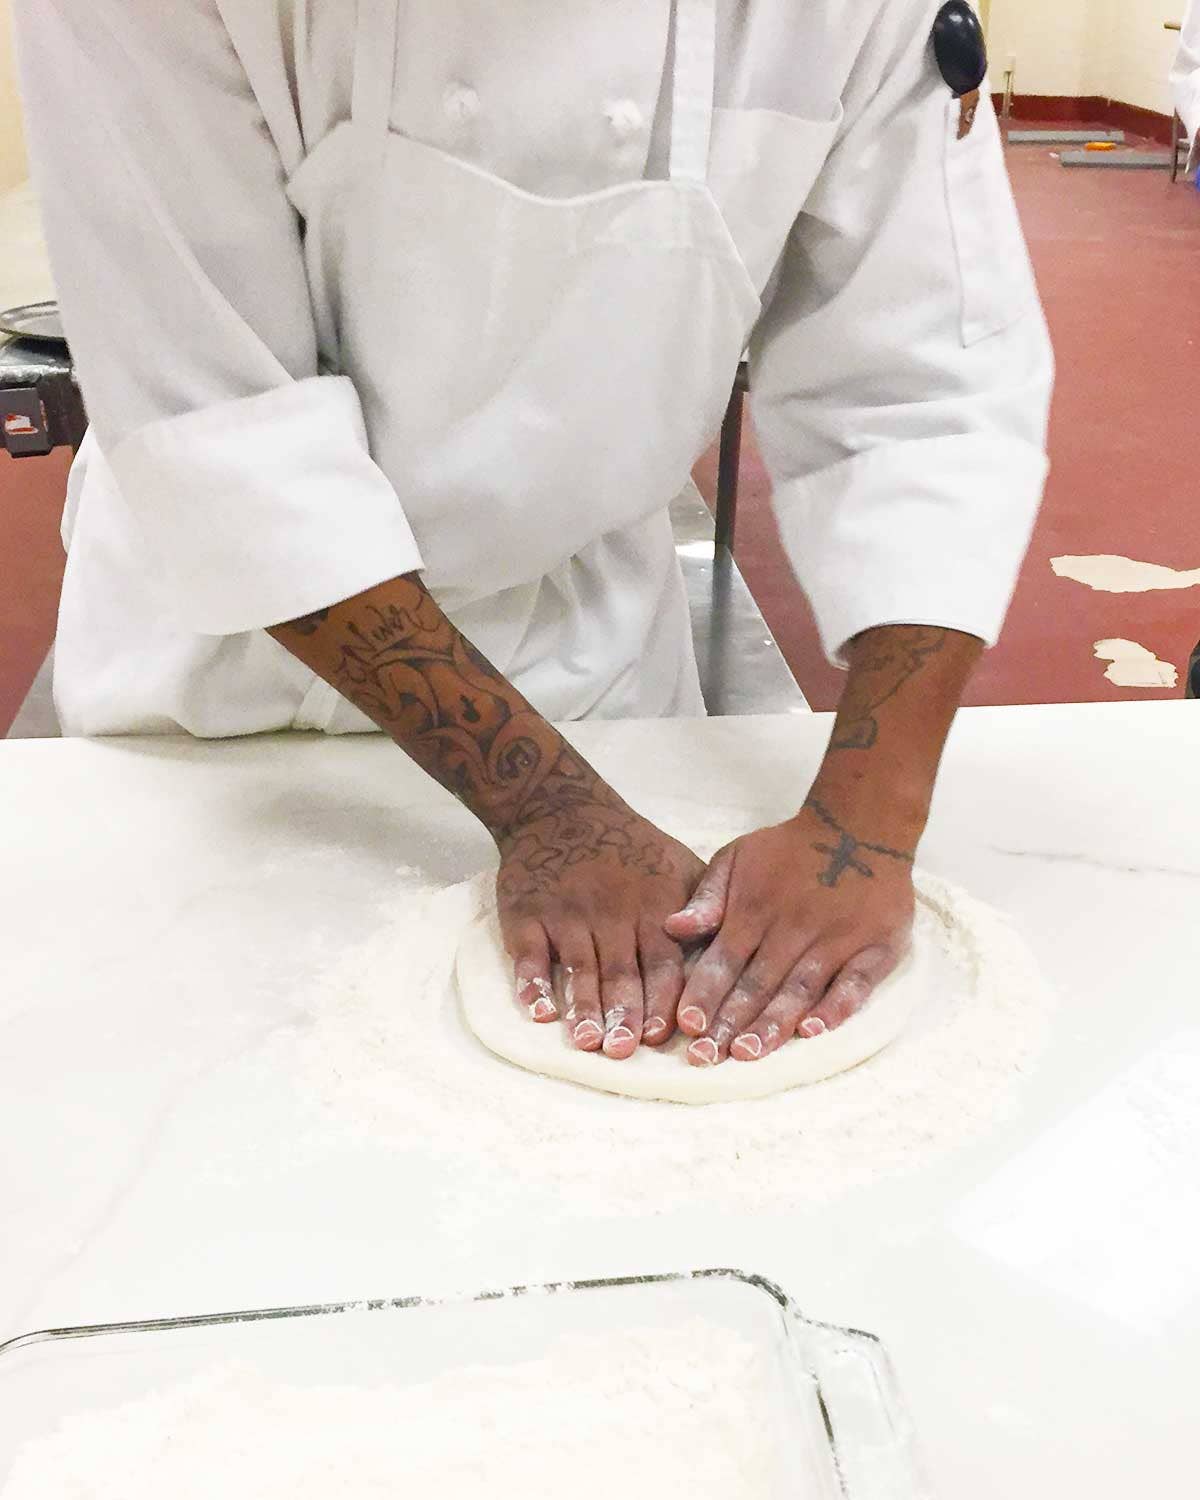 How a Pizza Non-Profit Prepares Inmates for Life Beyond Prison Walls